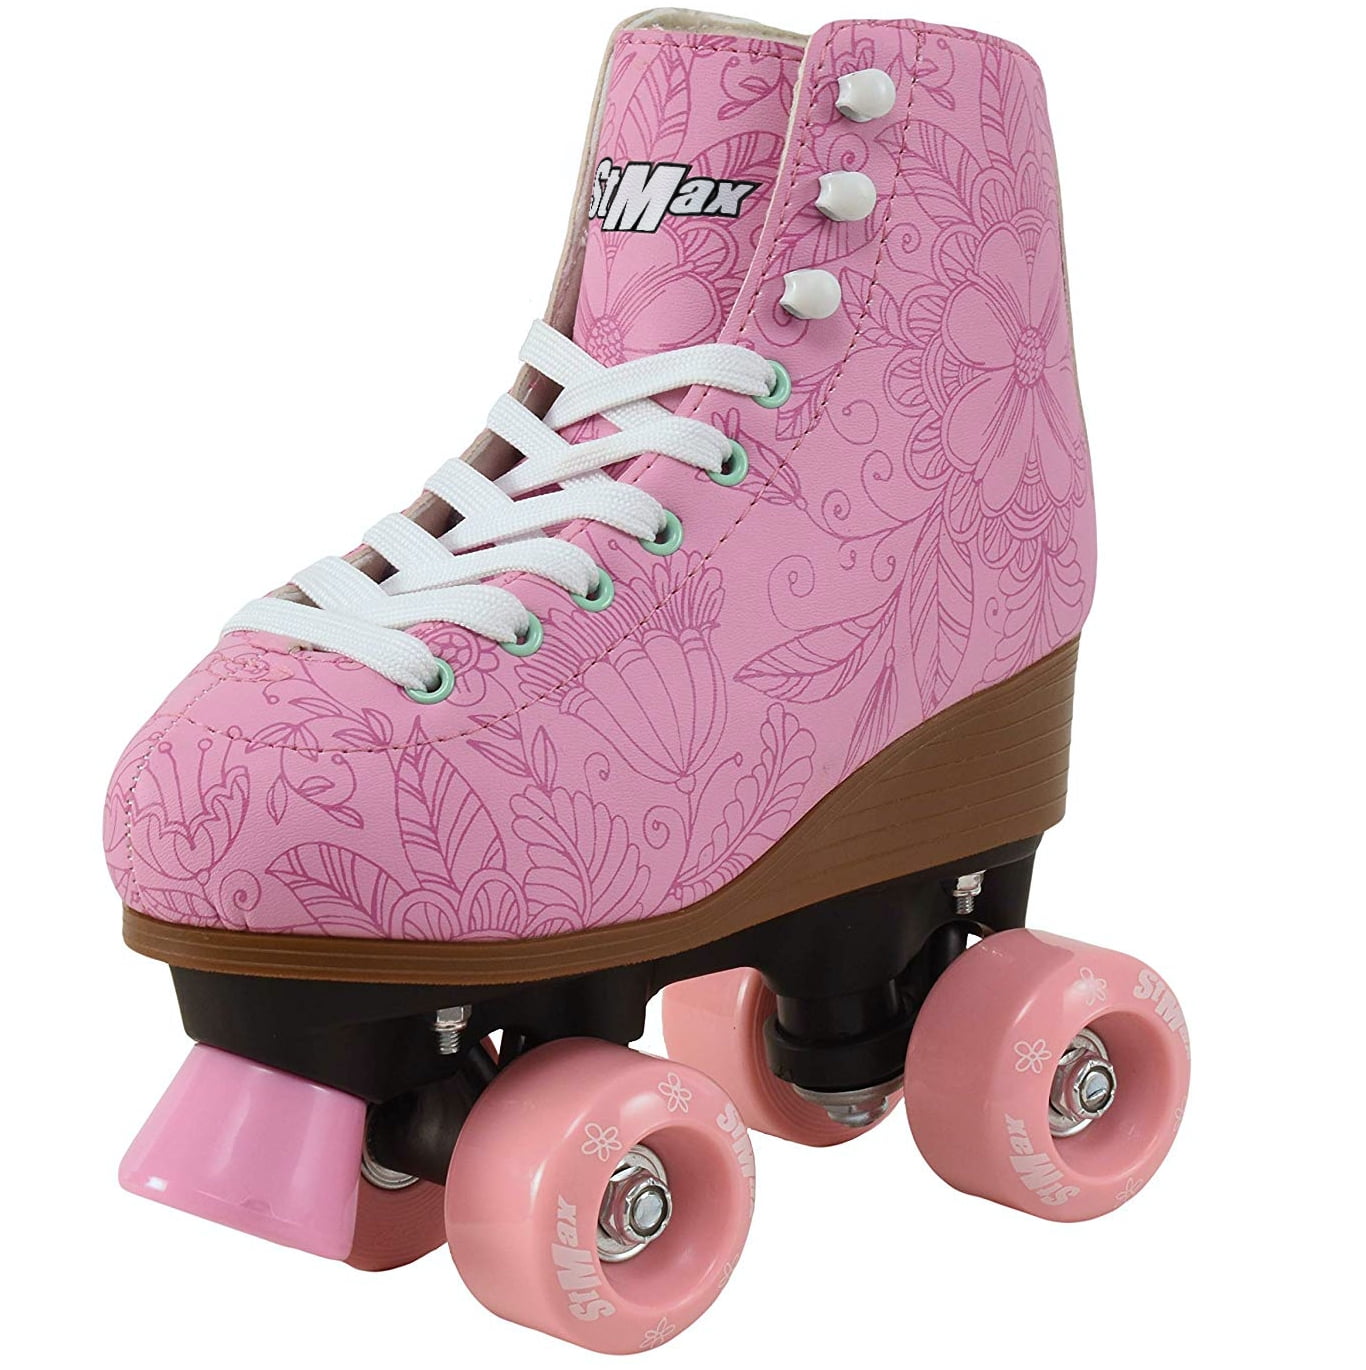 Epic Splash High-Top Indoor Womens Outdoor Quad Roller Skates w/ 2 pr of Laces Pink & Yellow 